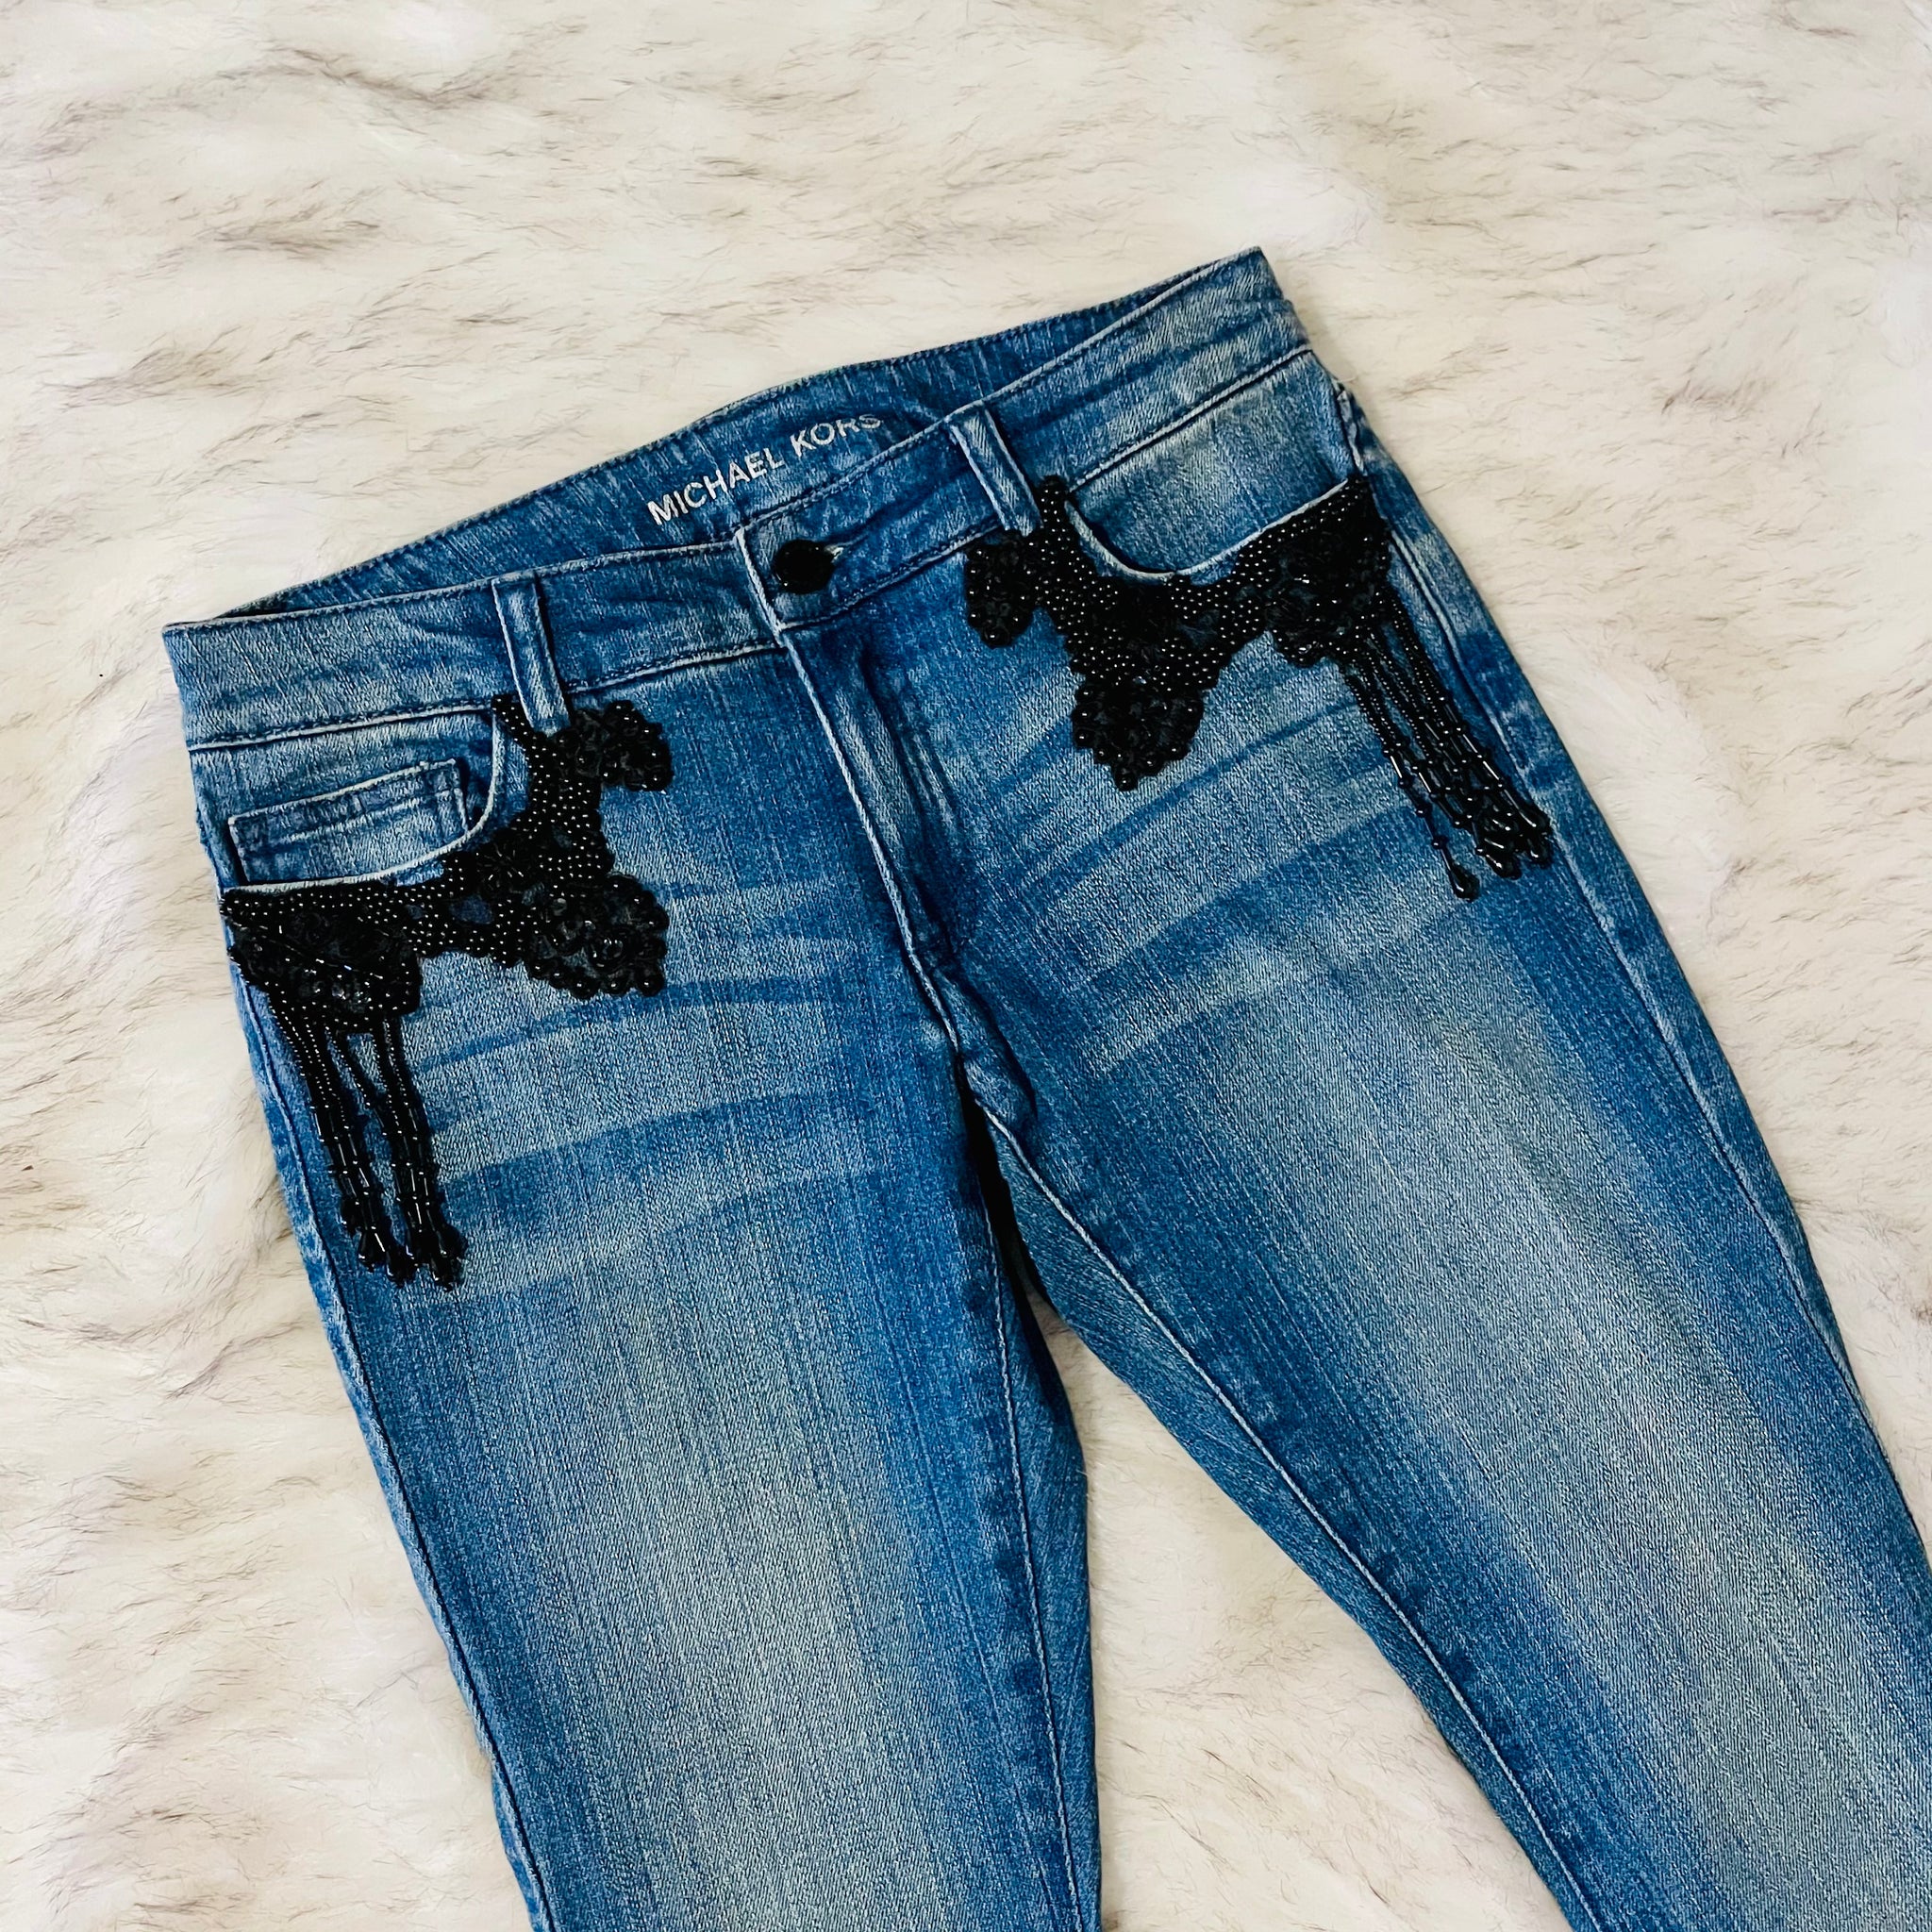 NEW Michael Kors beaded bootcut jeans, Size 2